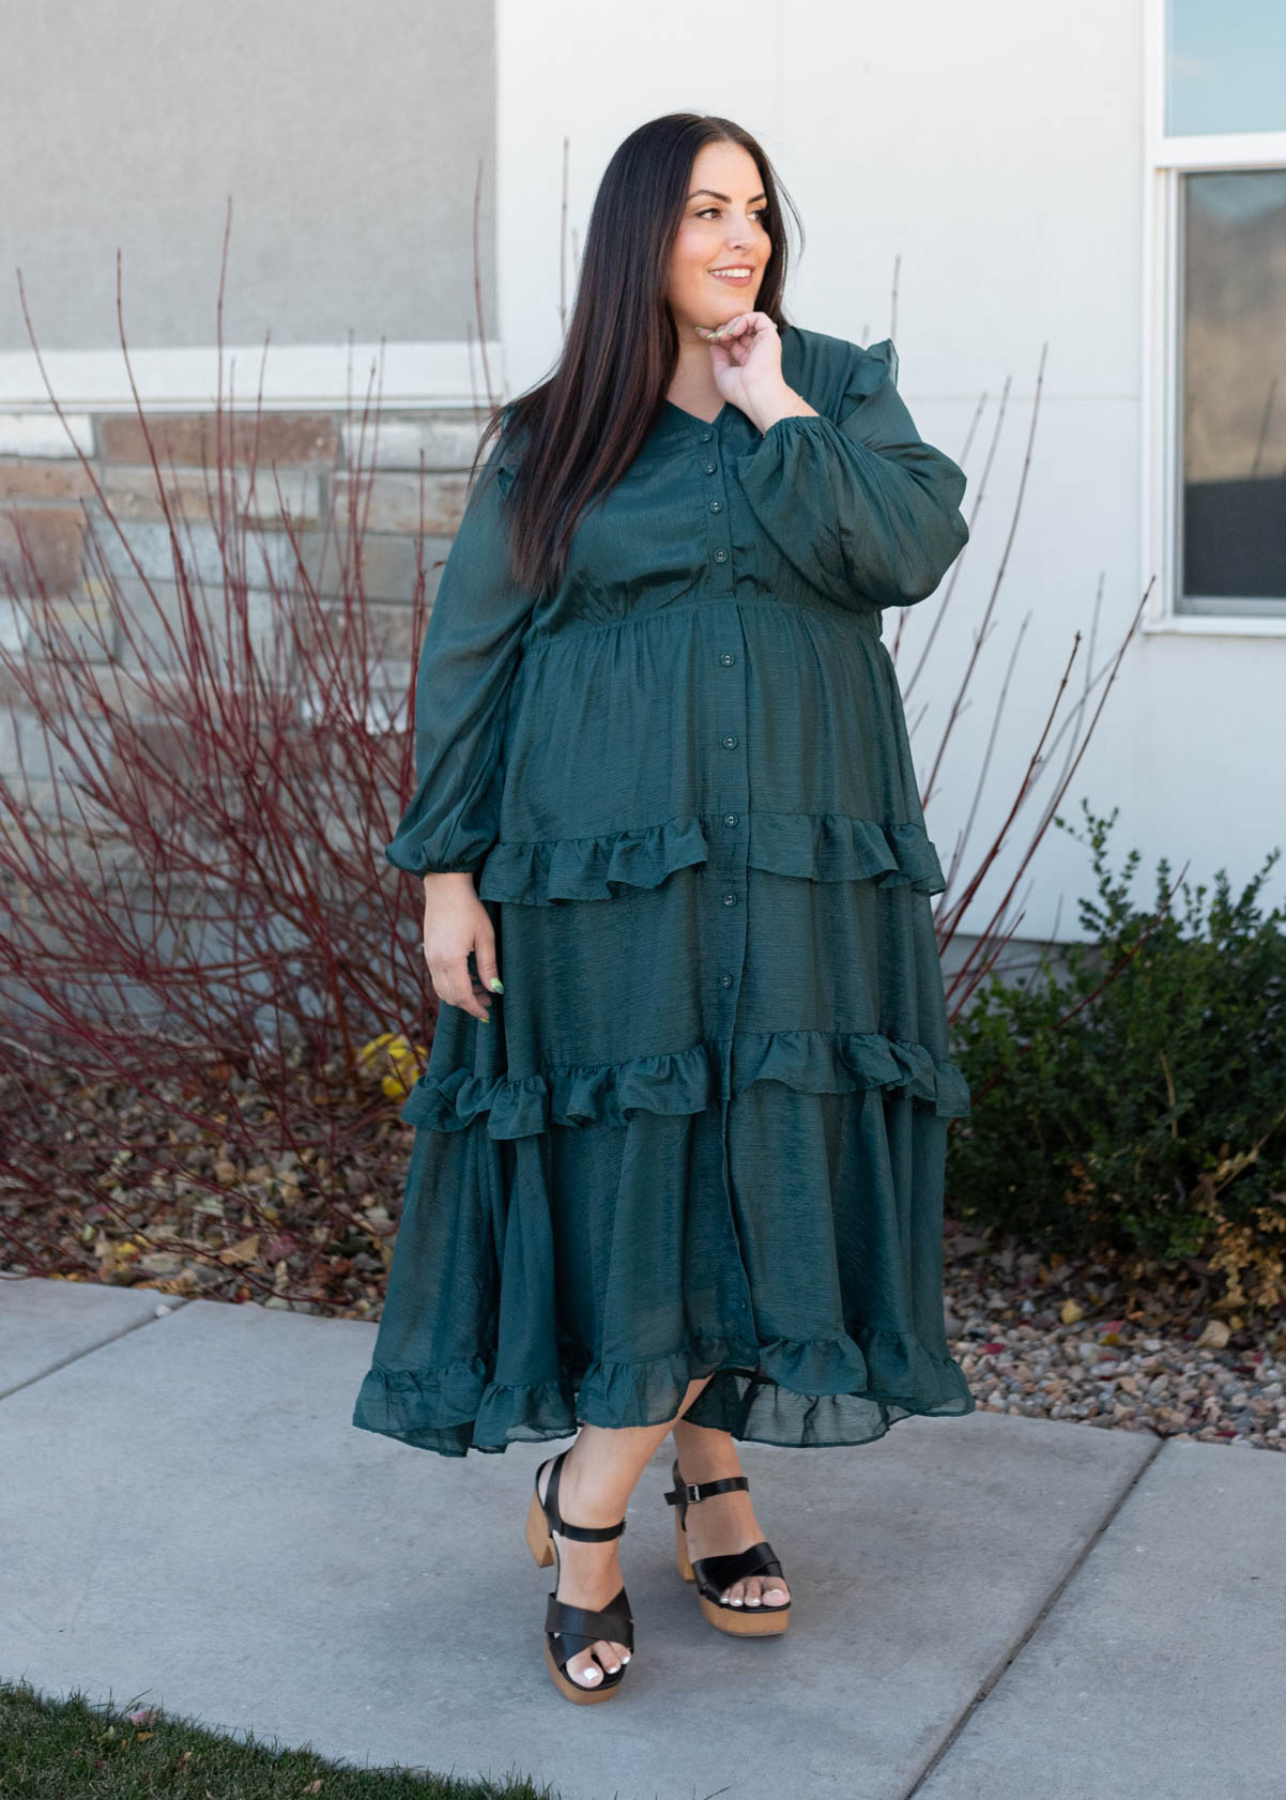 Long sleeve button up plus size hunter green tiered dress